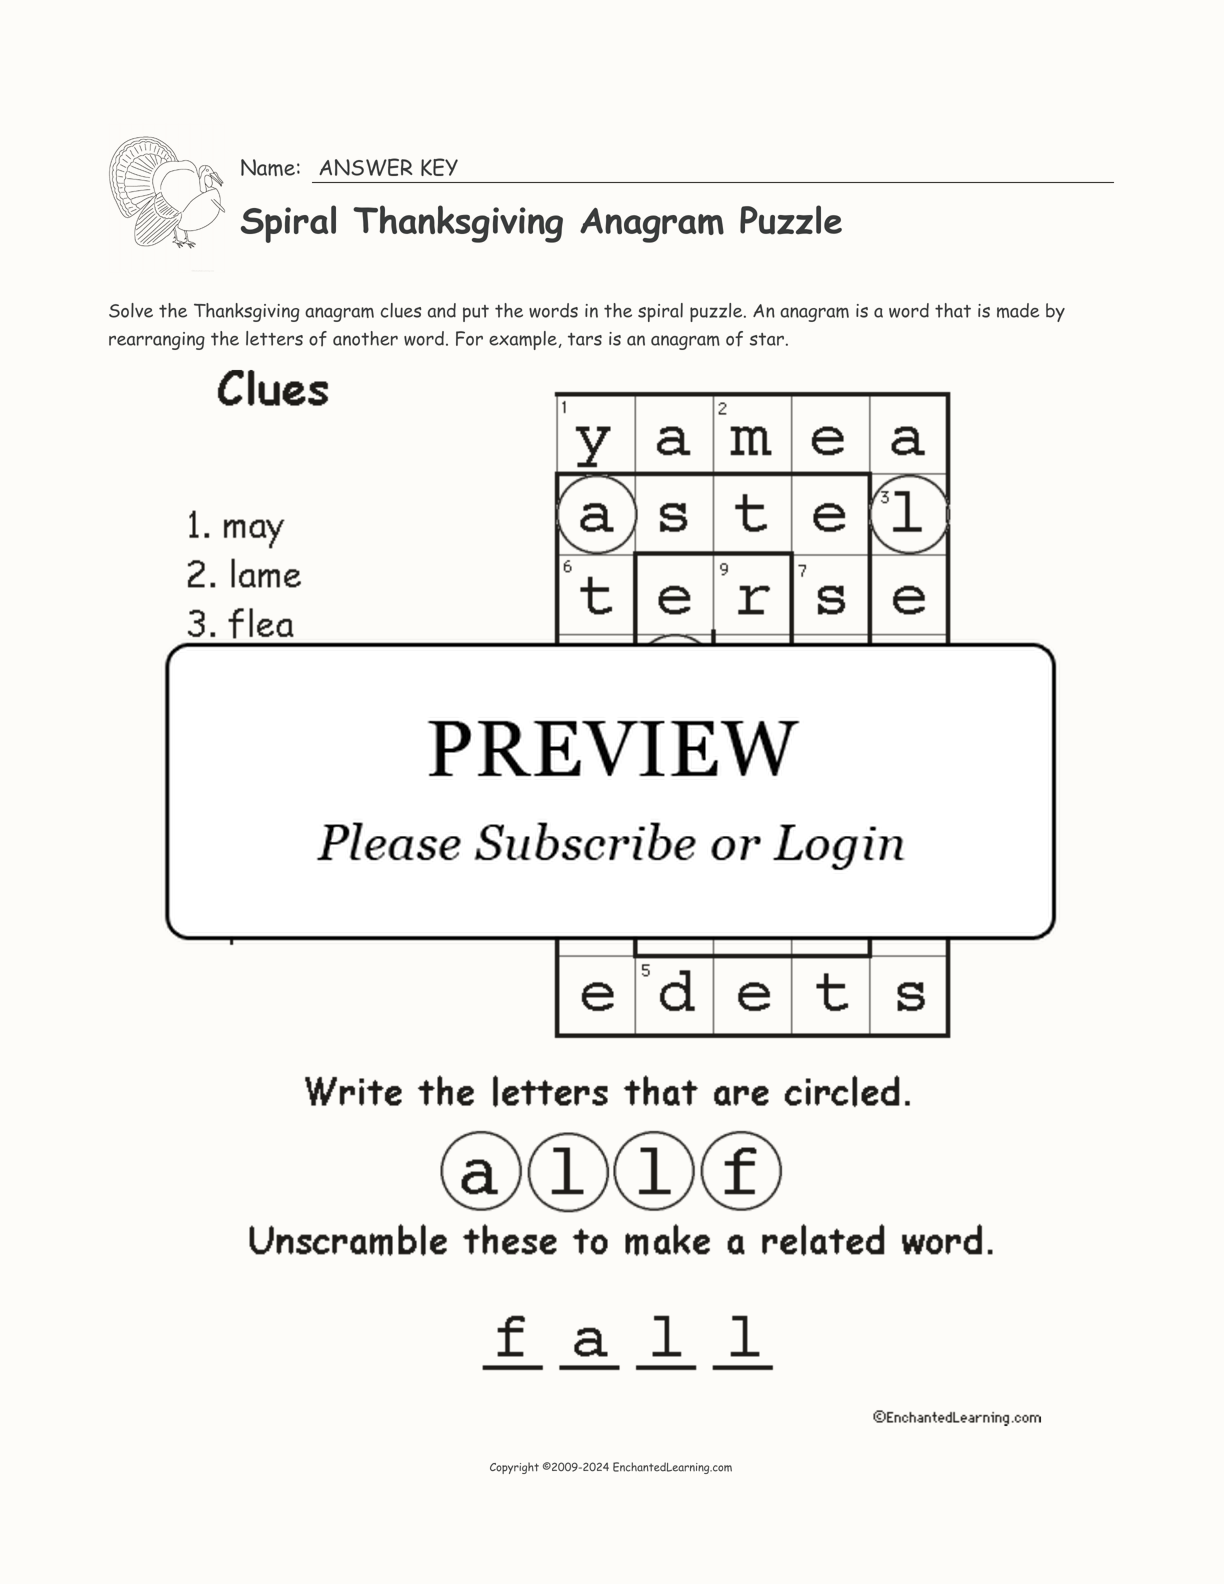 Spiral Thanksgiving Anagram Puzzle interactive worksheet page 2